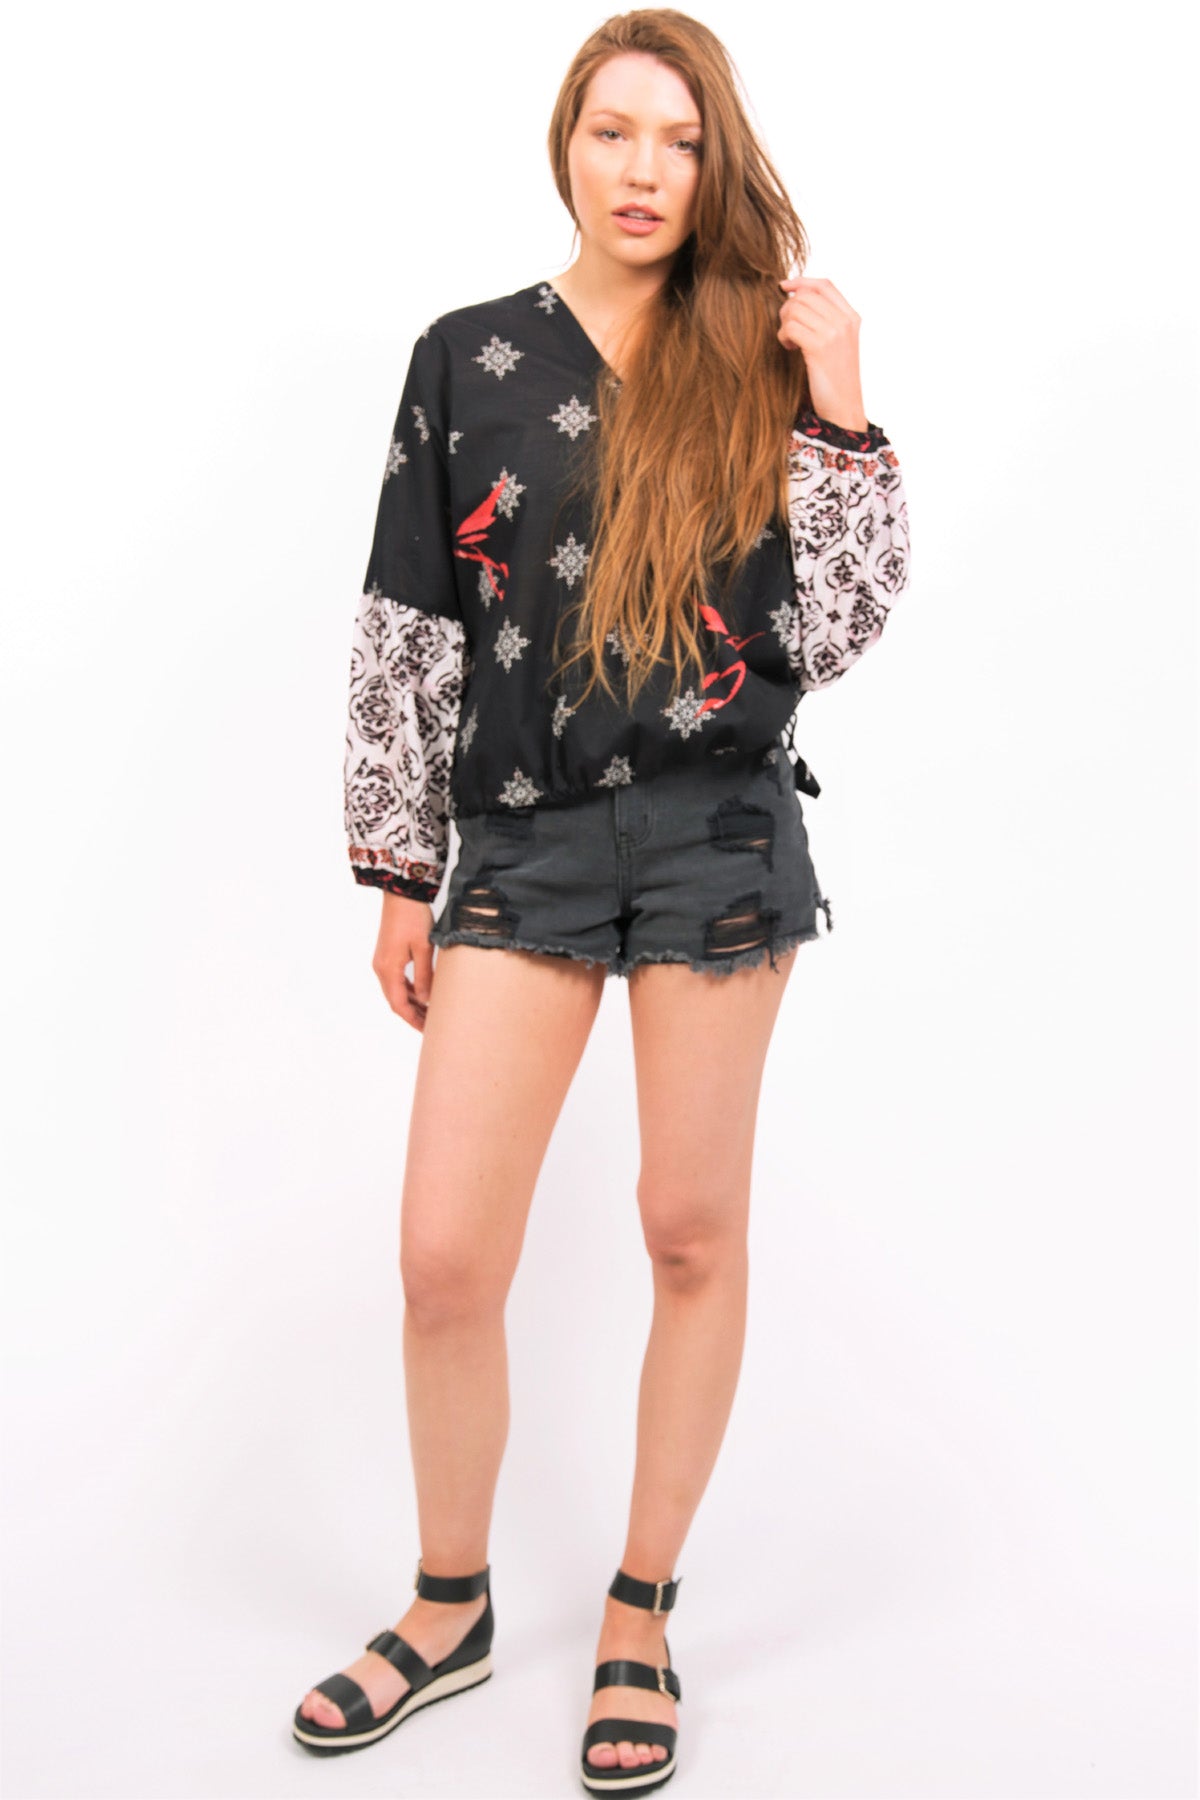 ORA PRINTED COTTON TOP - Zoha online- BLACK & WHITE PRINTED TOP WORN WITH SHORTS AND SANDALS